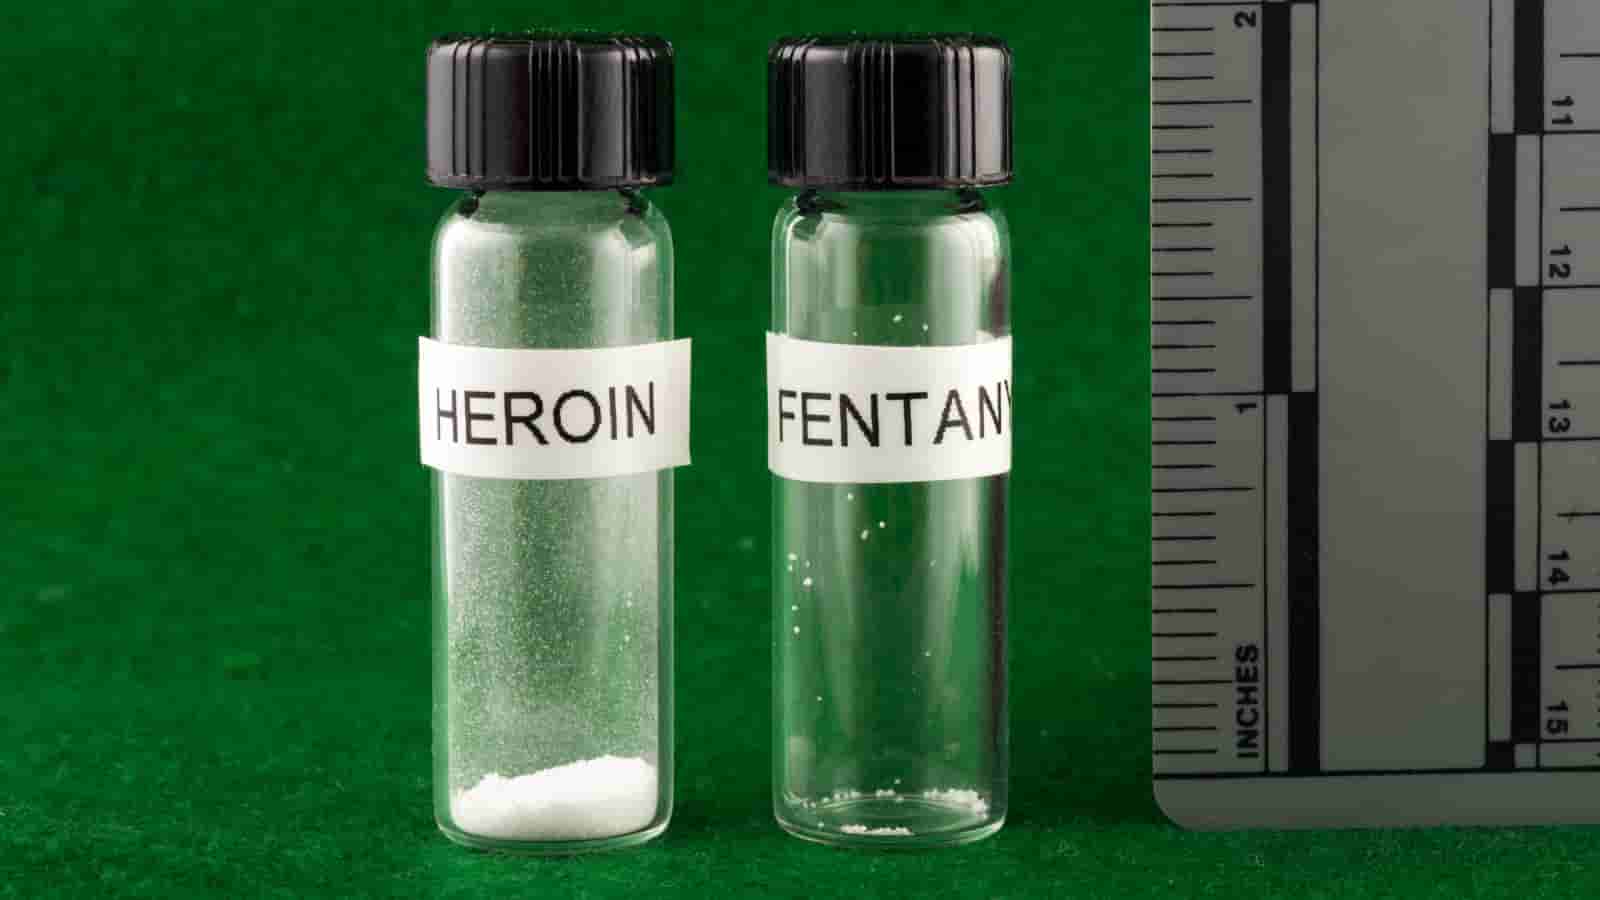 Millions of Lethal Fentanyl Doses Busted by Texas State Troopers During Traffic Stop